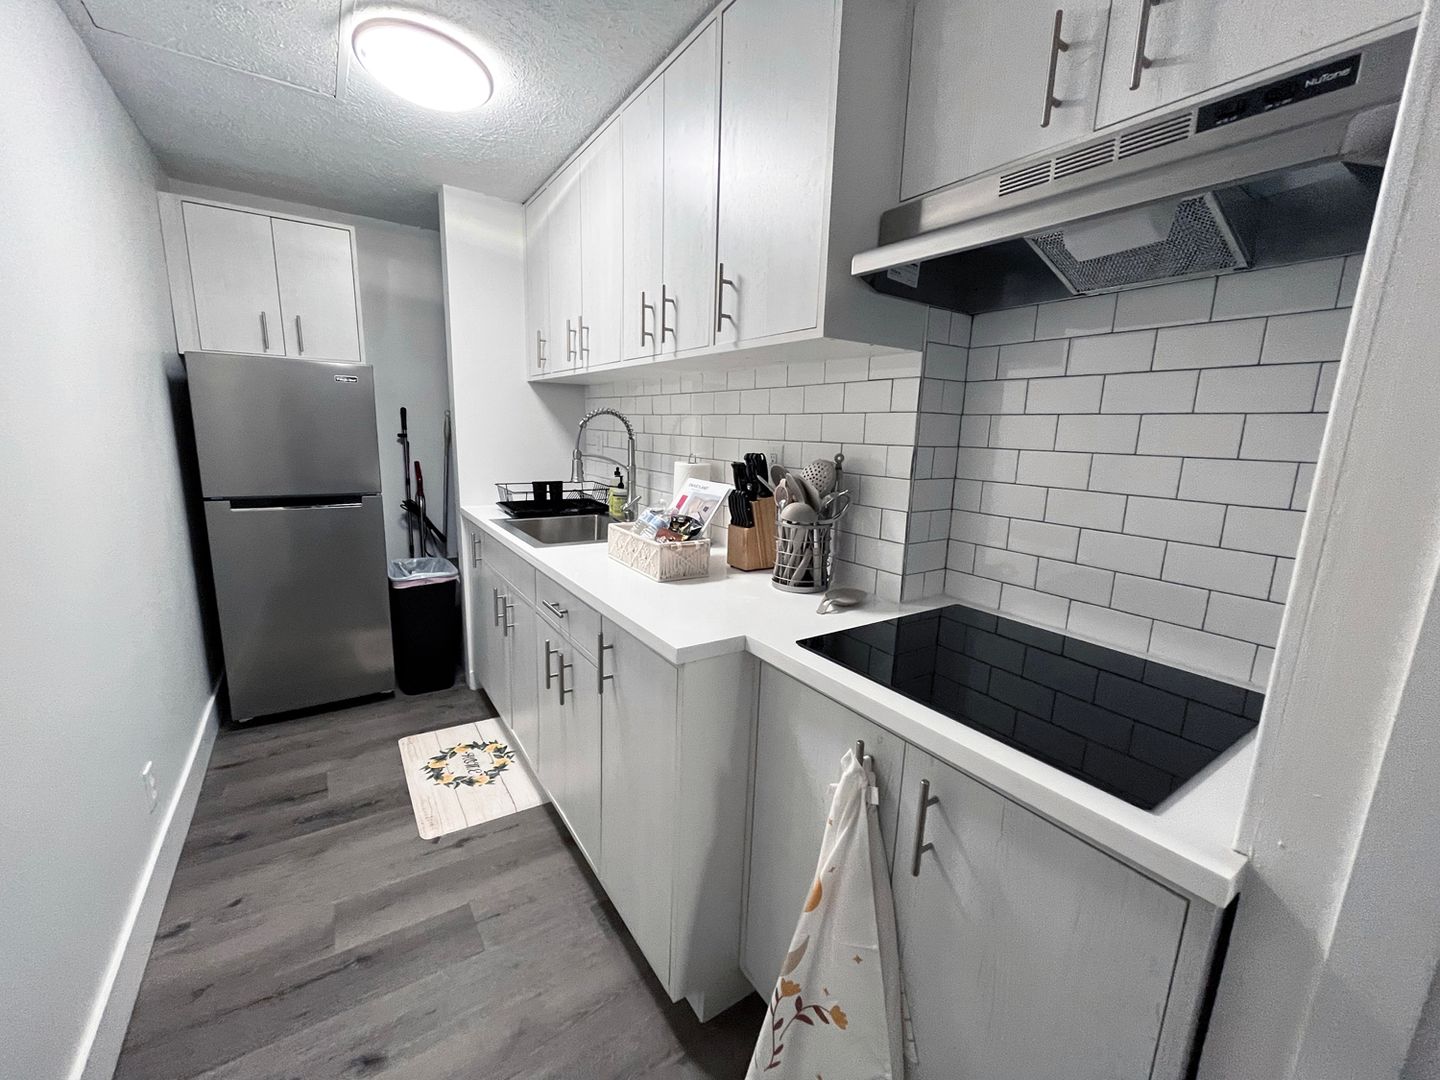 1 Bed and 1 Bath Apartments for Rent | Newly Renovated Image